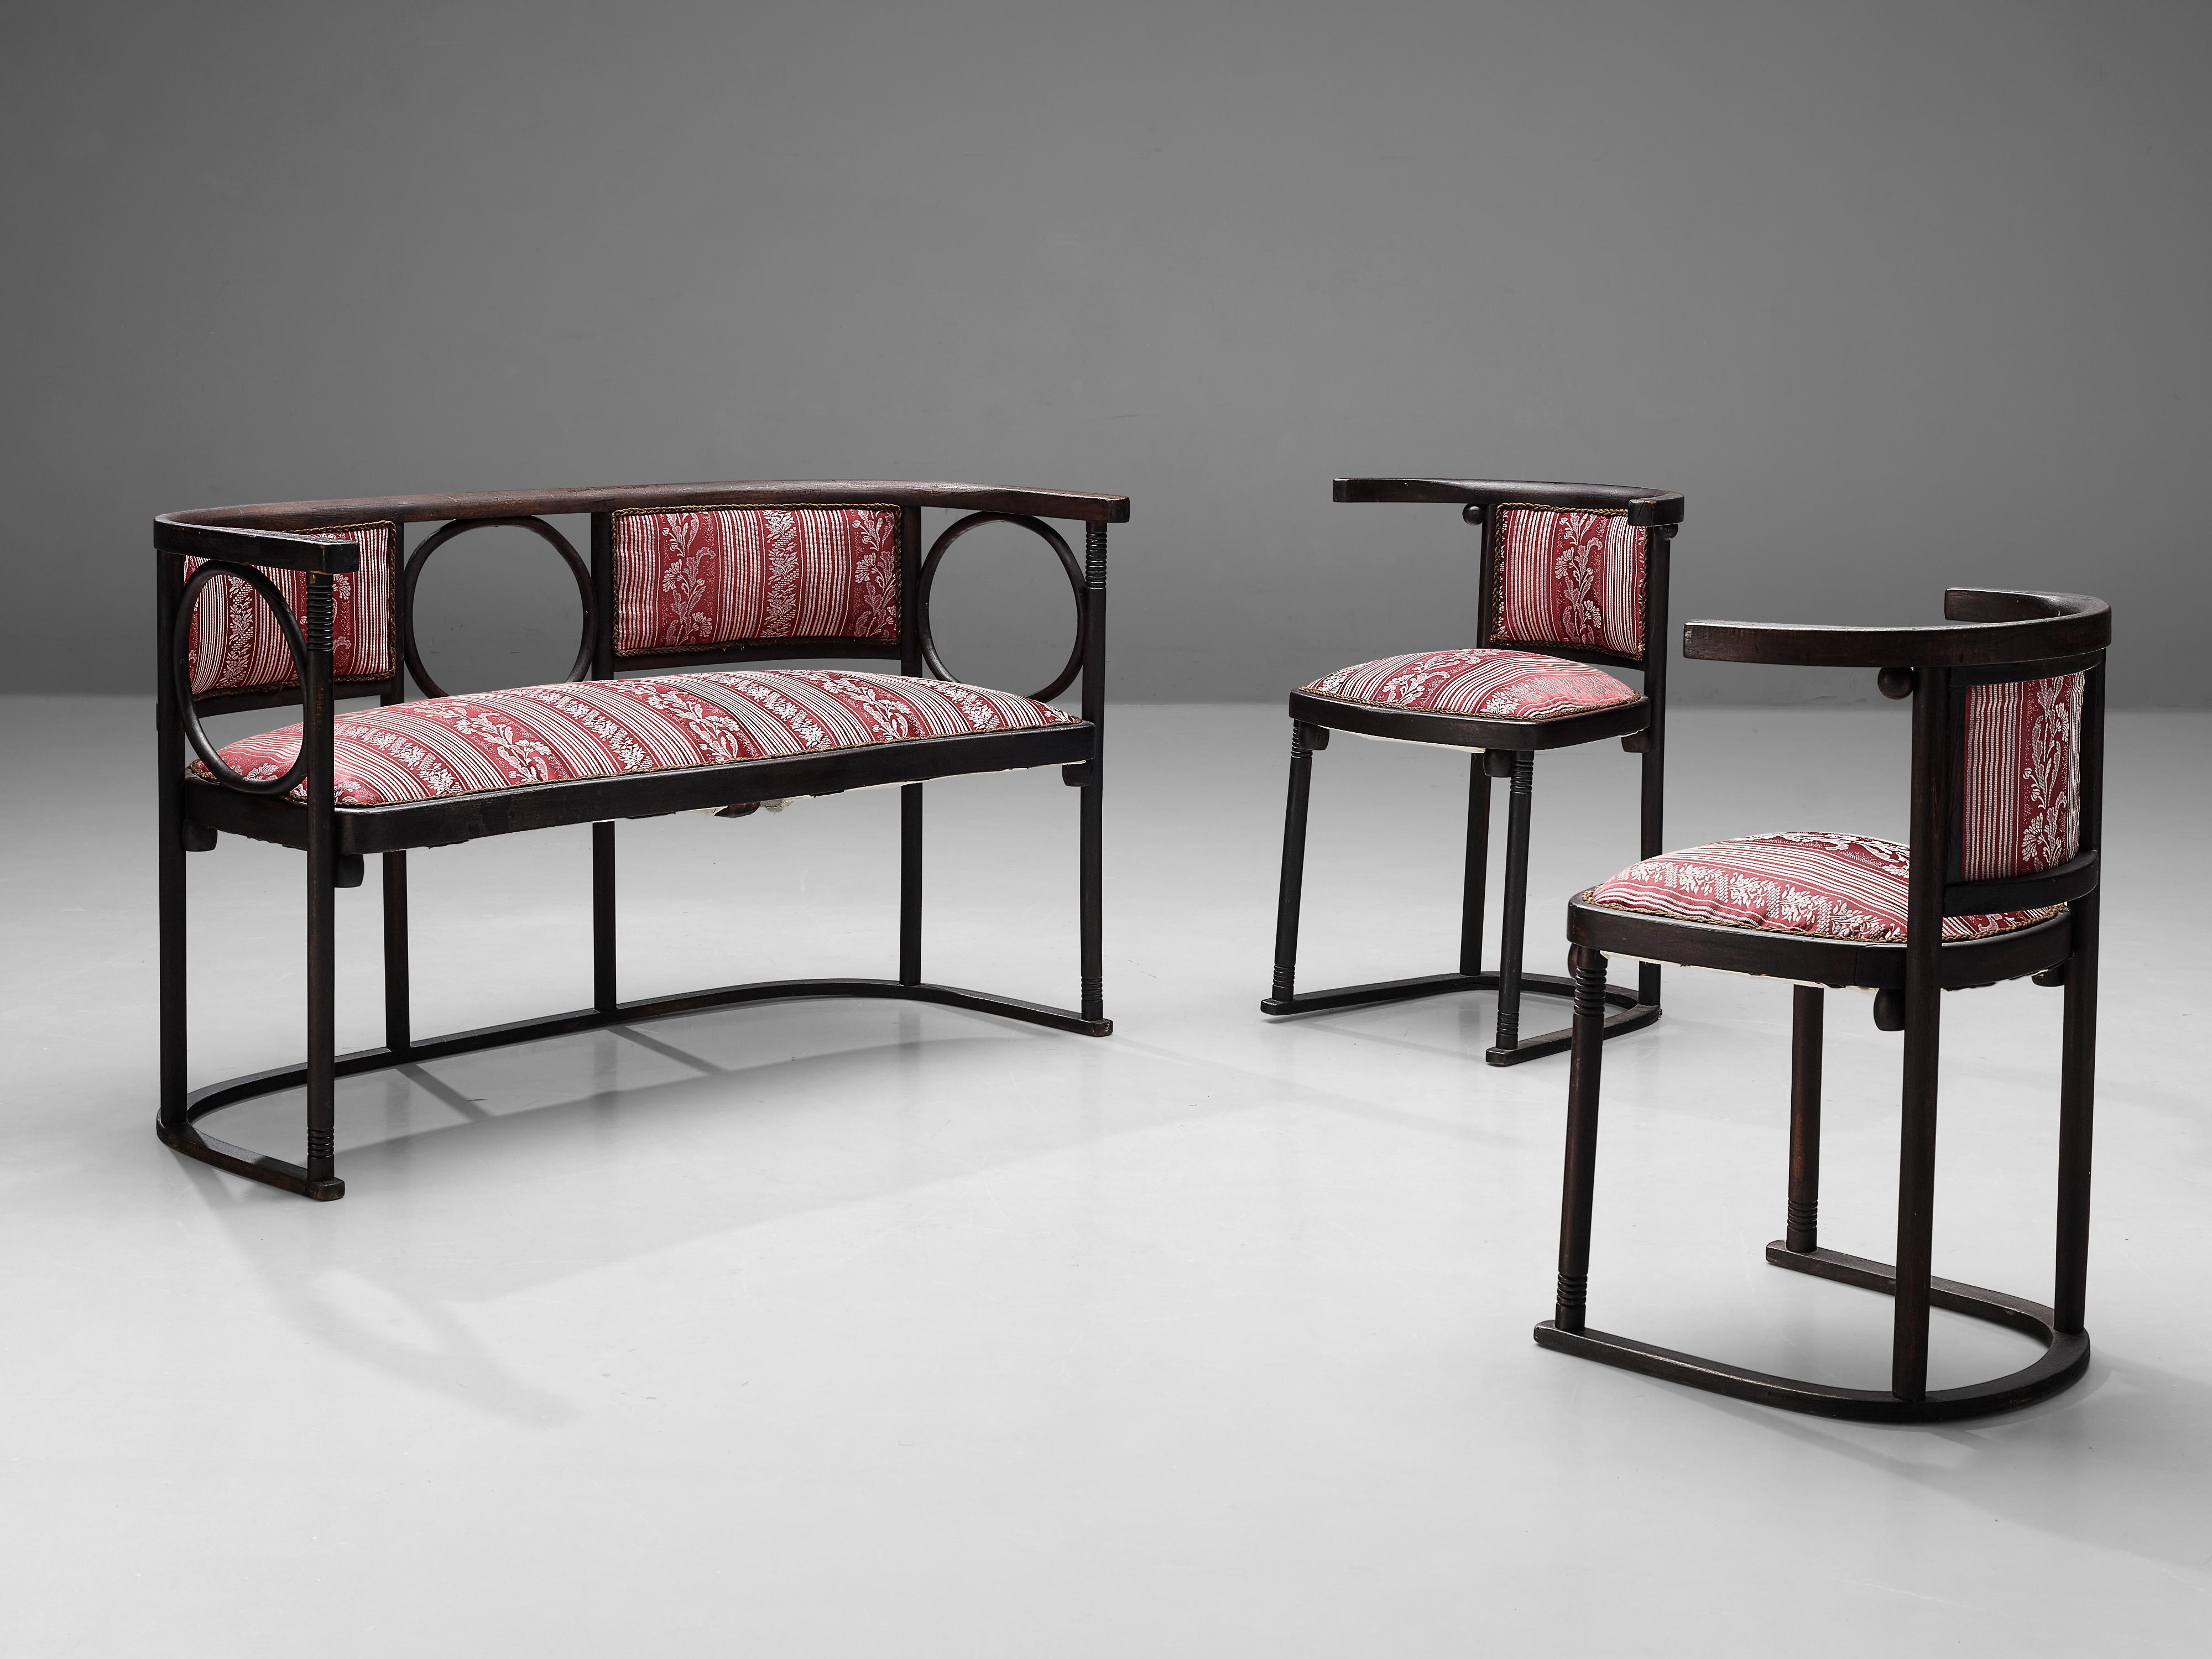 Josef Hoffmann Bench in Floral Upholstery 2